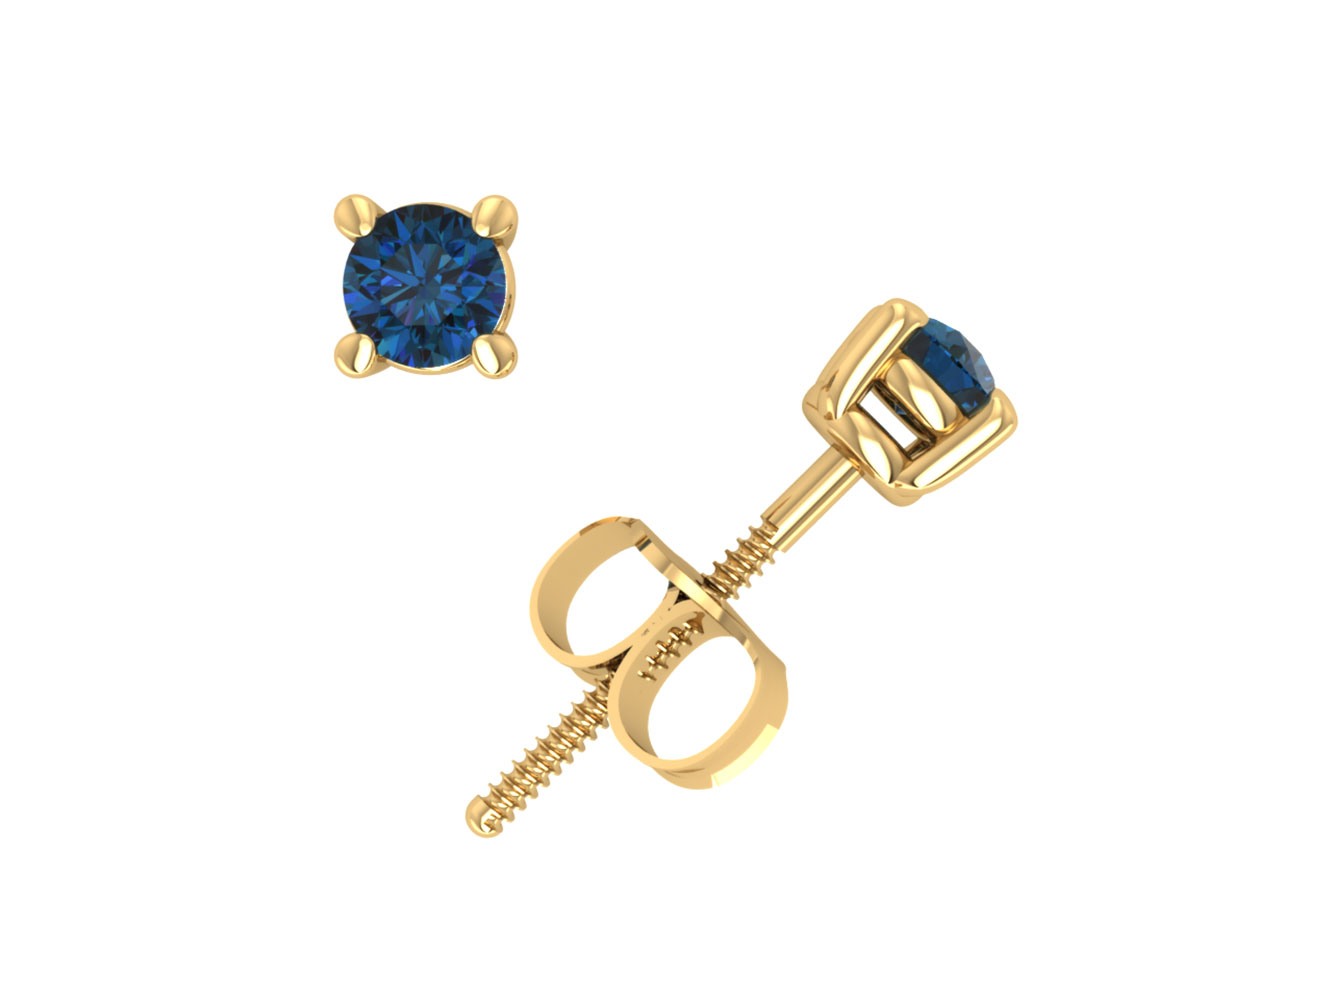 Jewel We Sell Real 0.15Ct Round Blue Diamond Basket Stud Earrings 14k White or Yellow Gold 4Prong I1